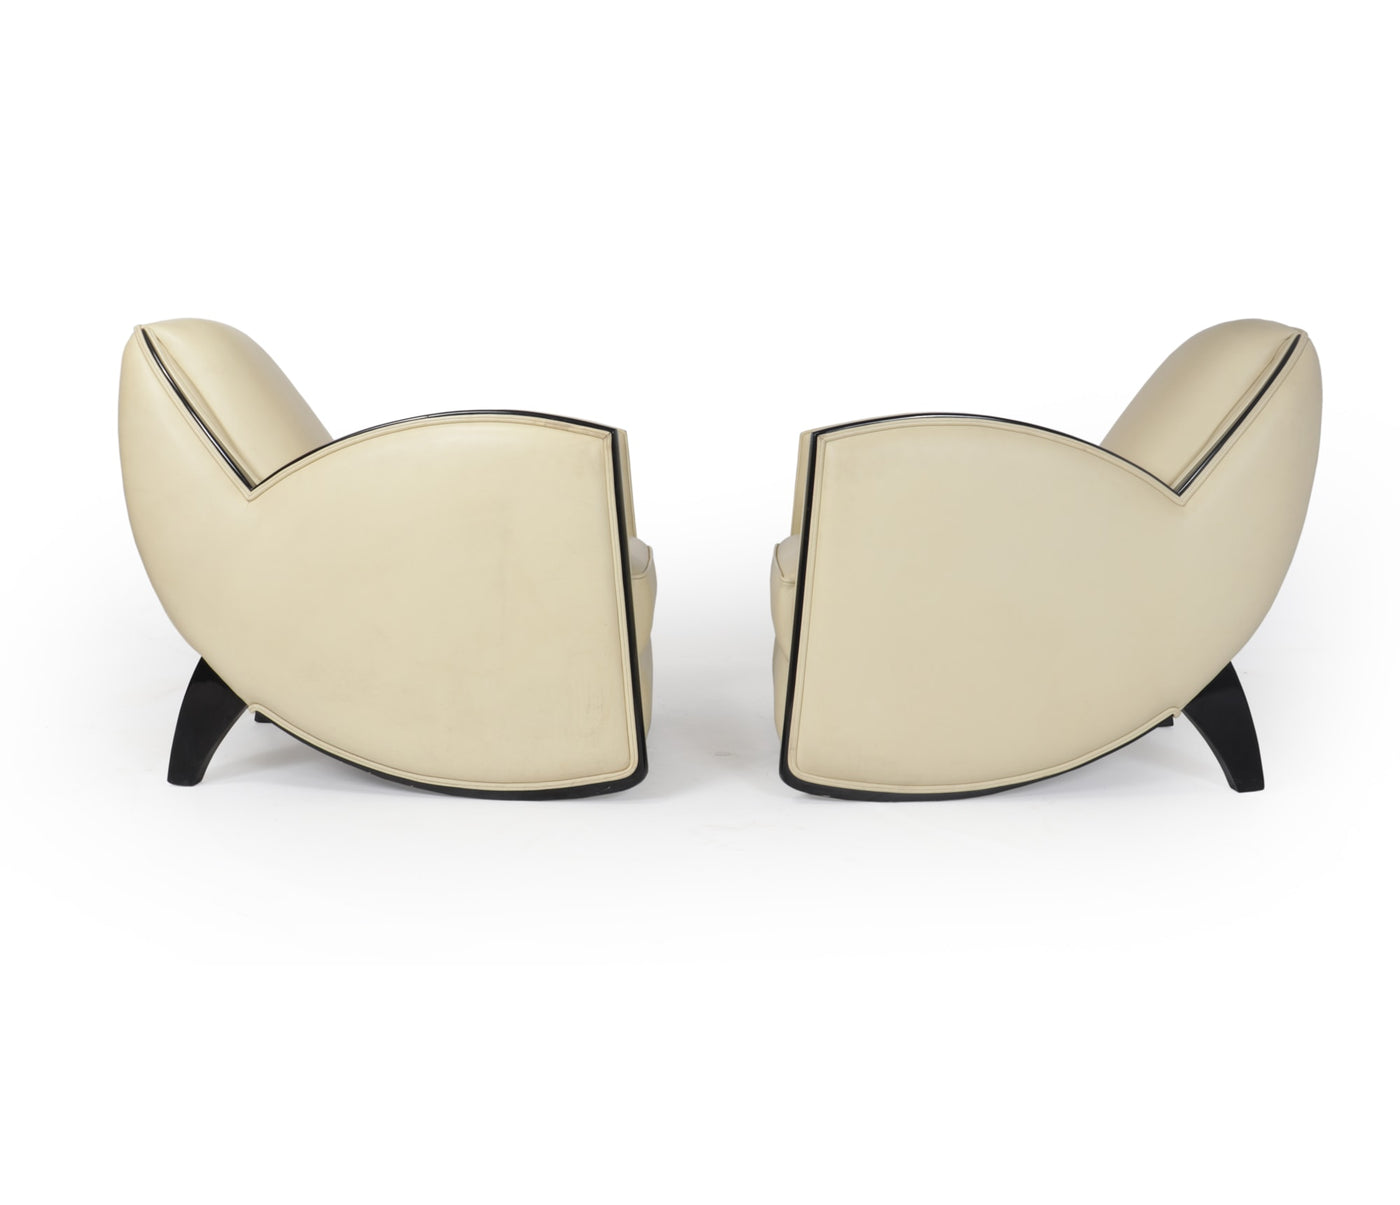 Art Deco Style Armchairs in Cream Leather